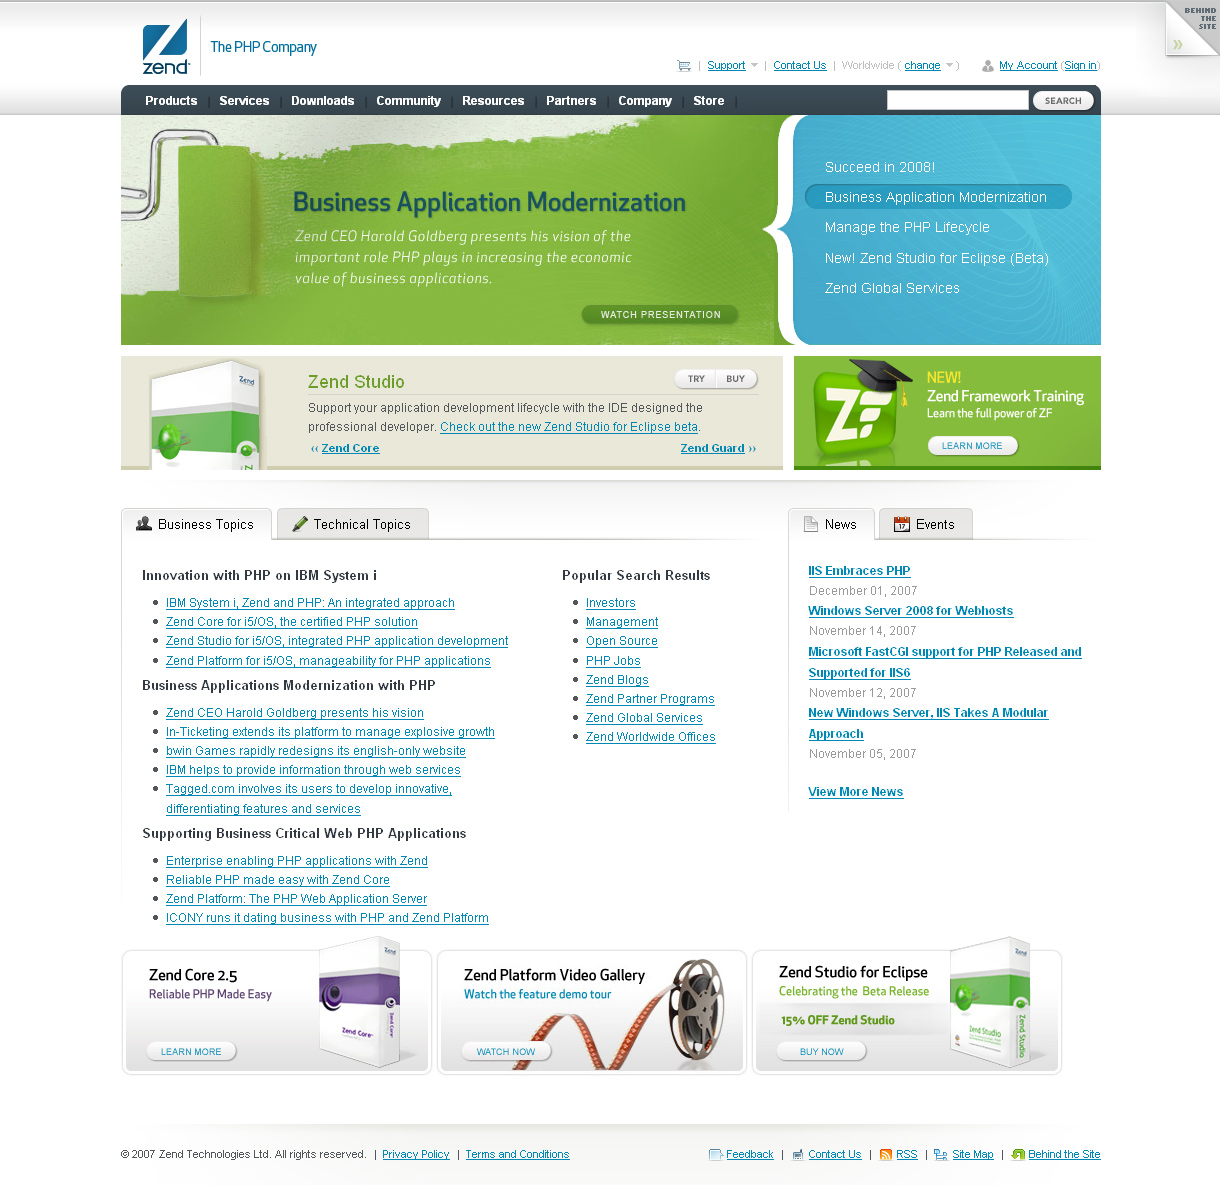 Zend - The PHP Company website in 2007